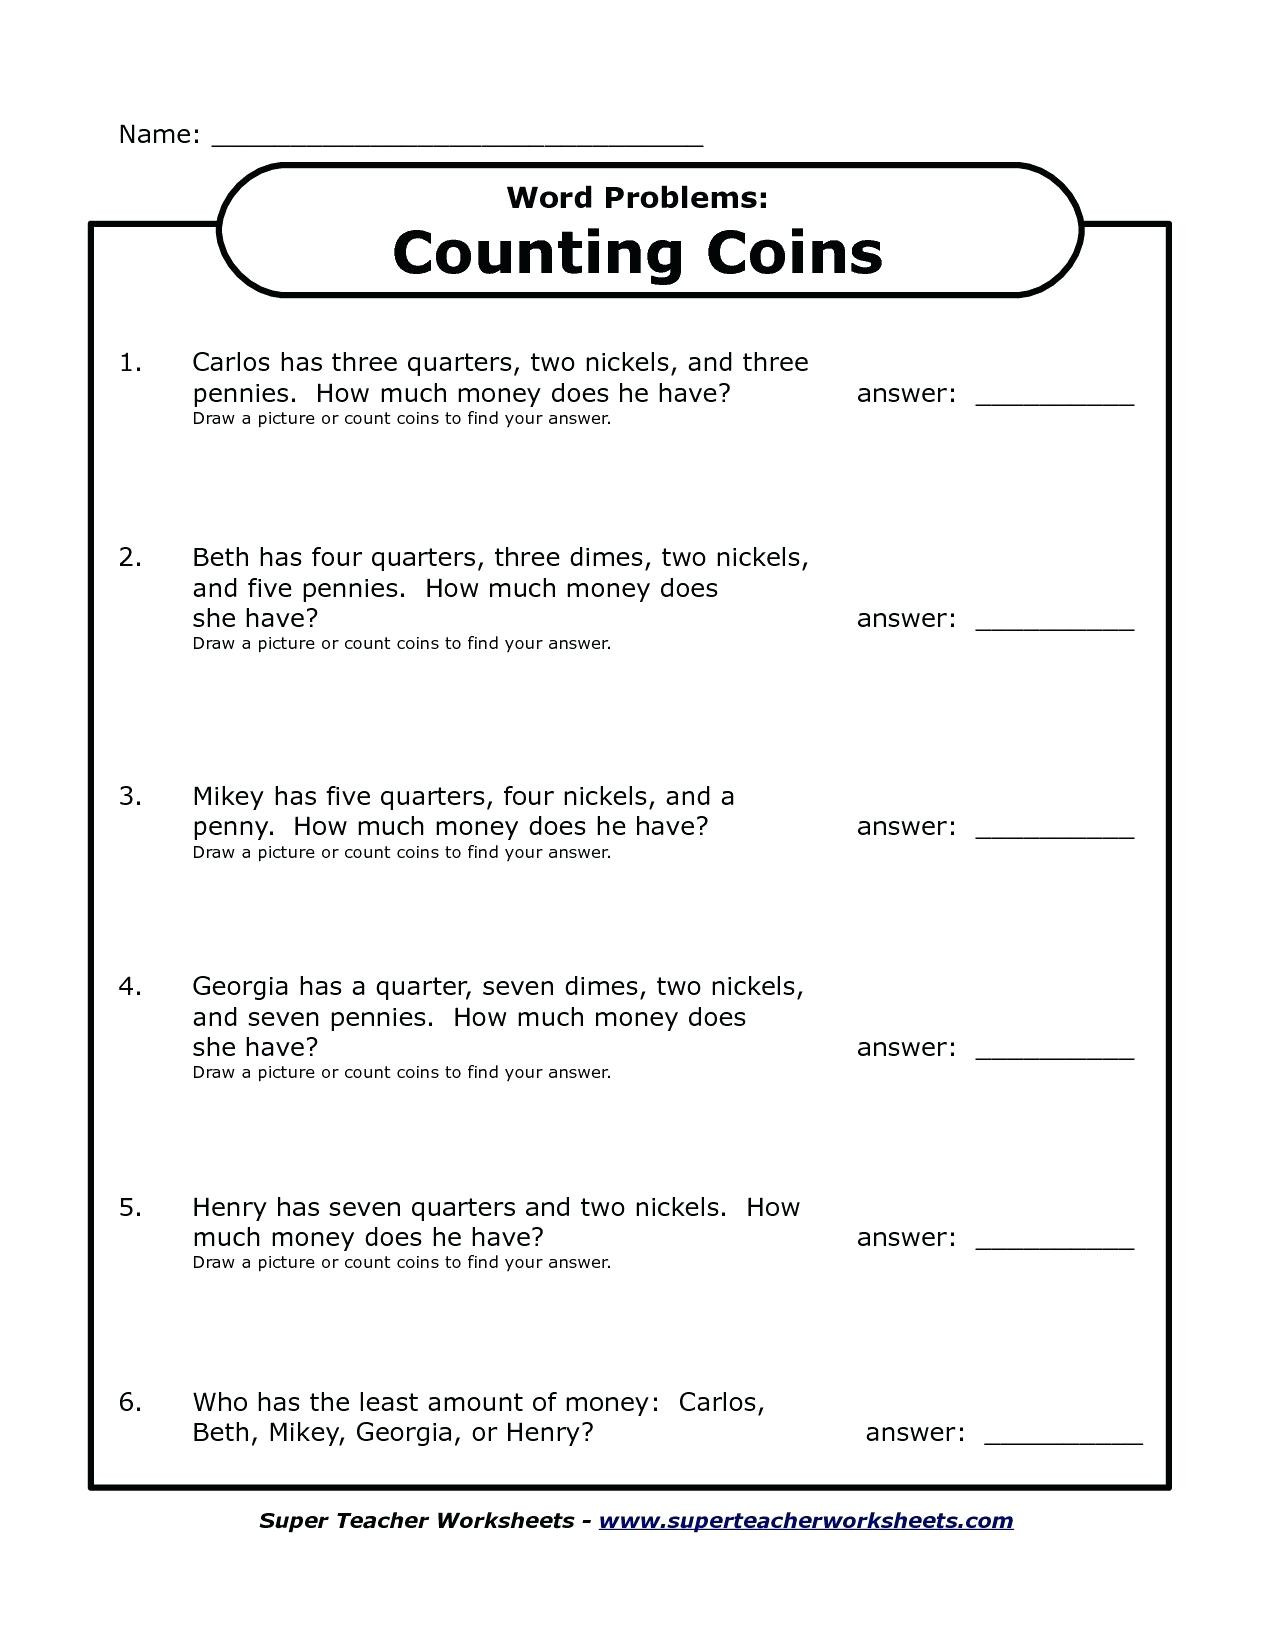 Free Math Worksheets Fourth Grade 4 Addition Adding 3 Digit and 1 Digit Numbers